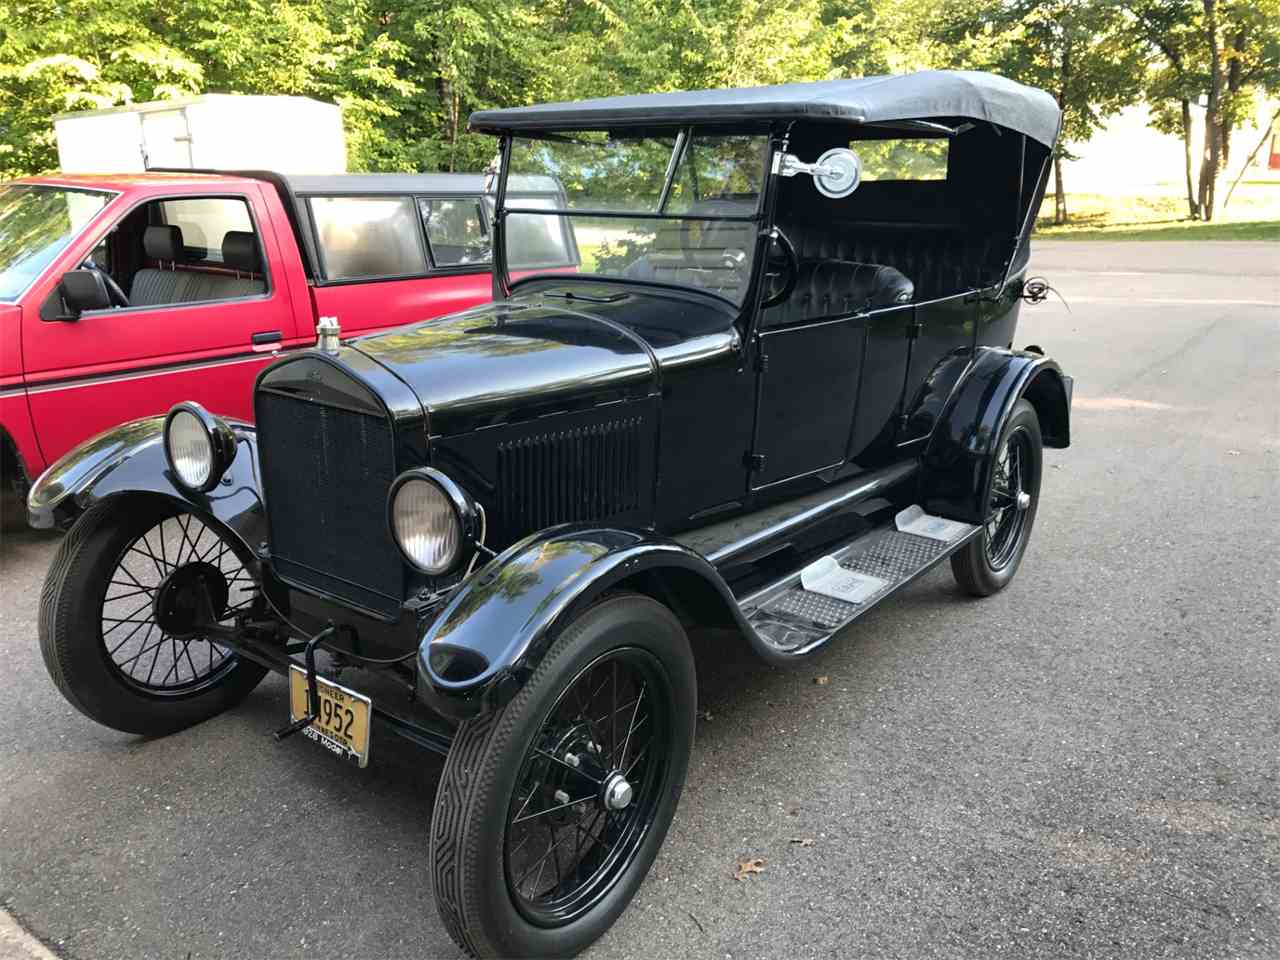 1926 Ford Model T for Sale  ClassicCars.com  CC1016828